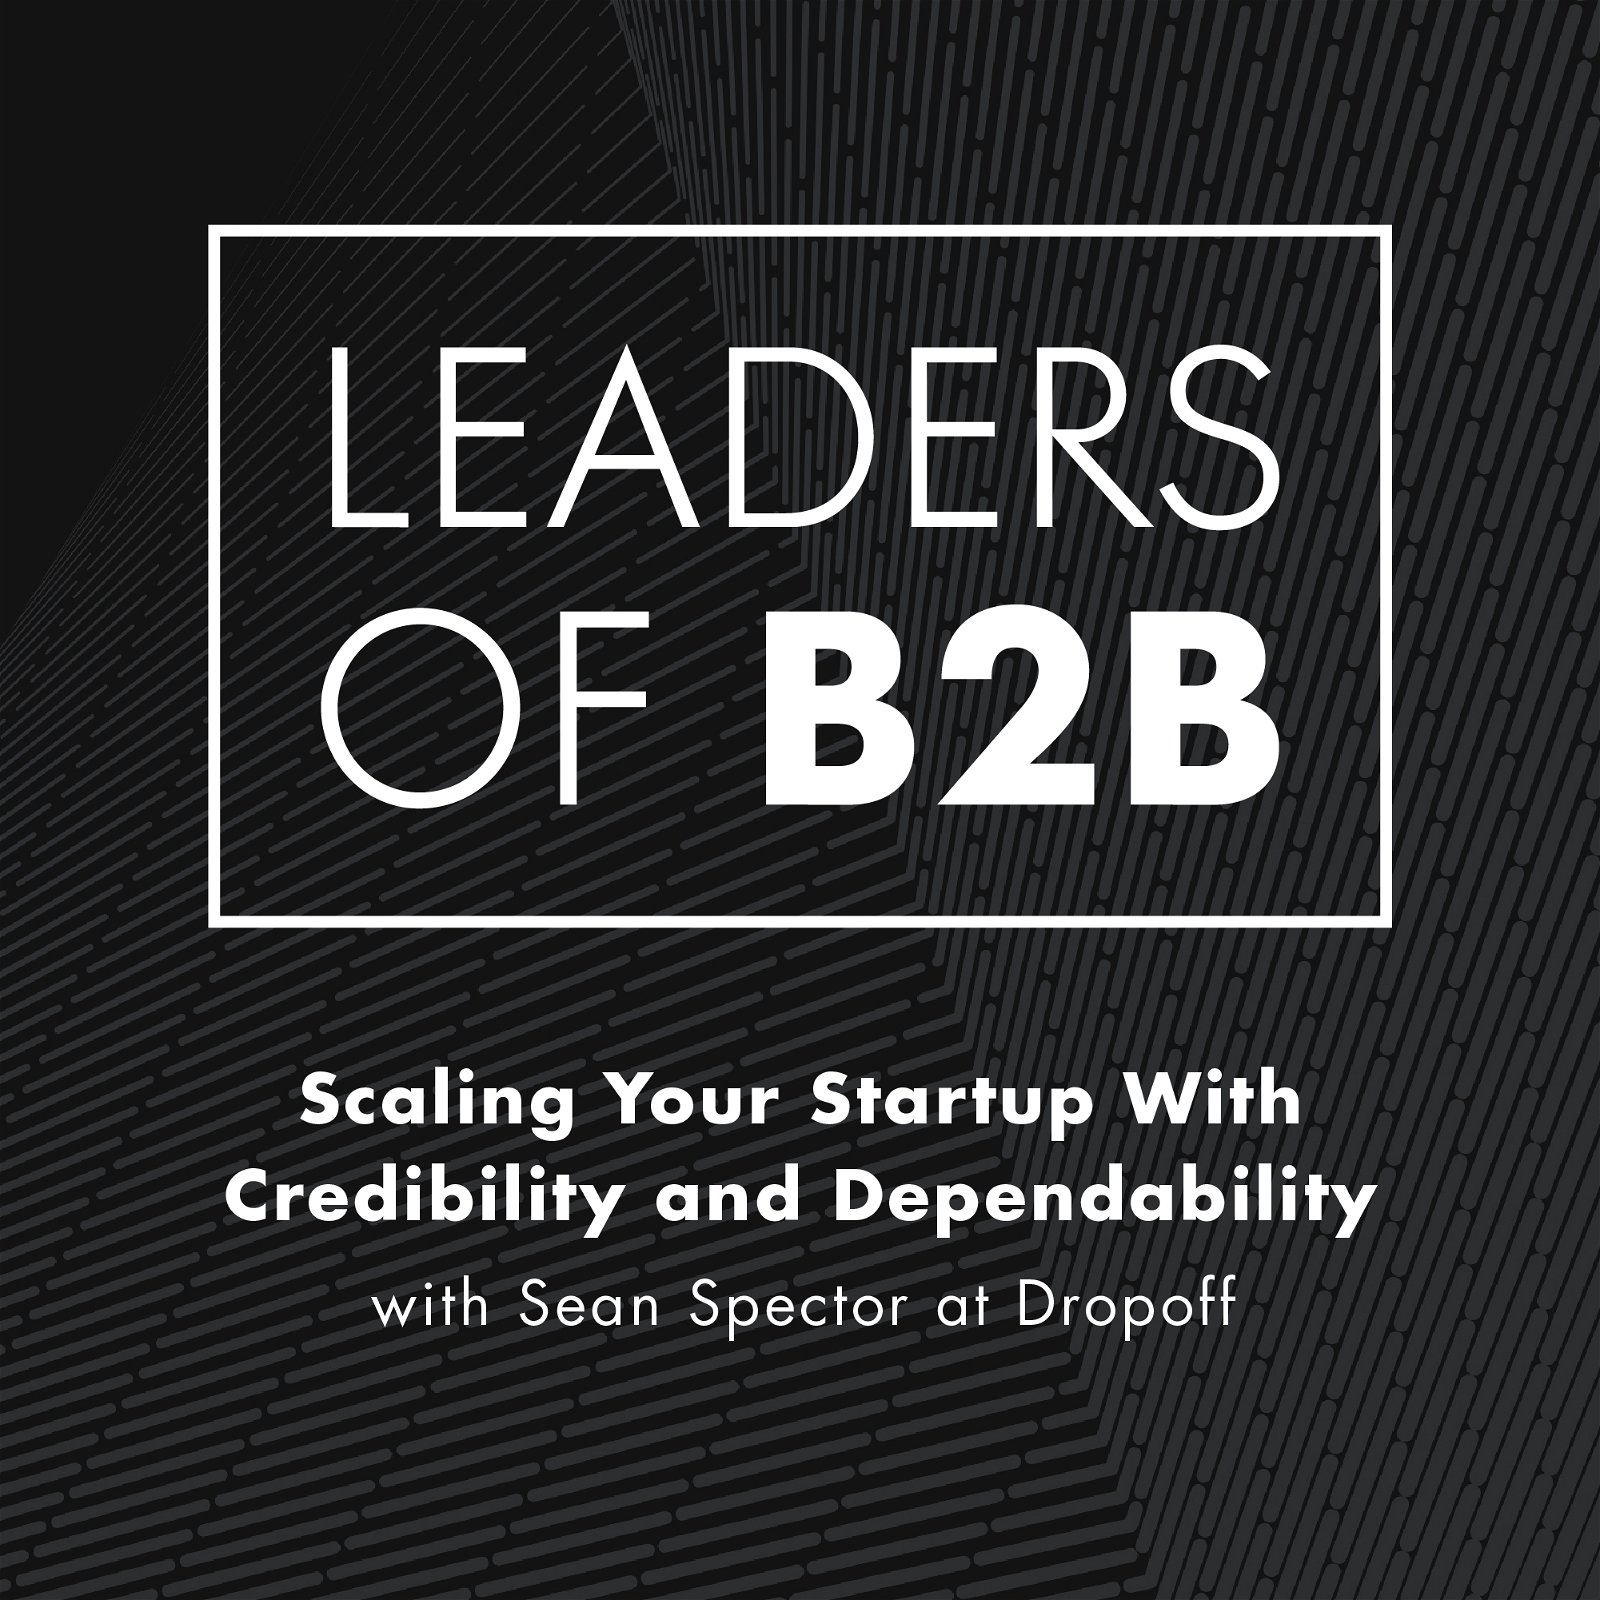 Scaling Your Startup With Credibility and Dependability with Sean Spector at Dropoff